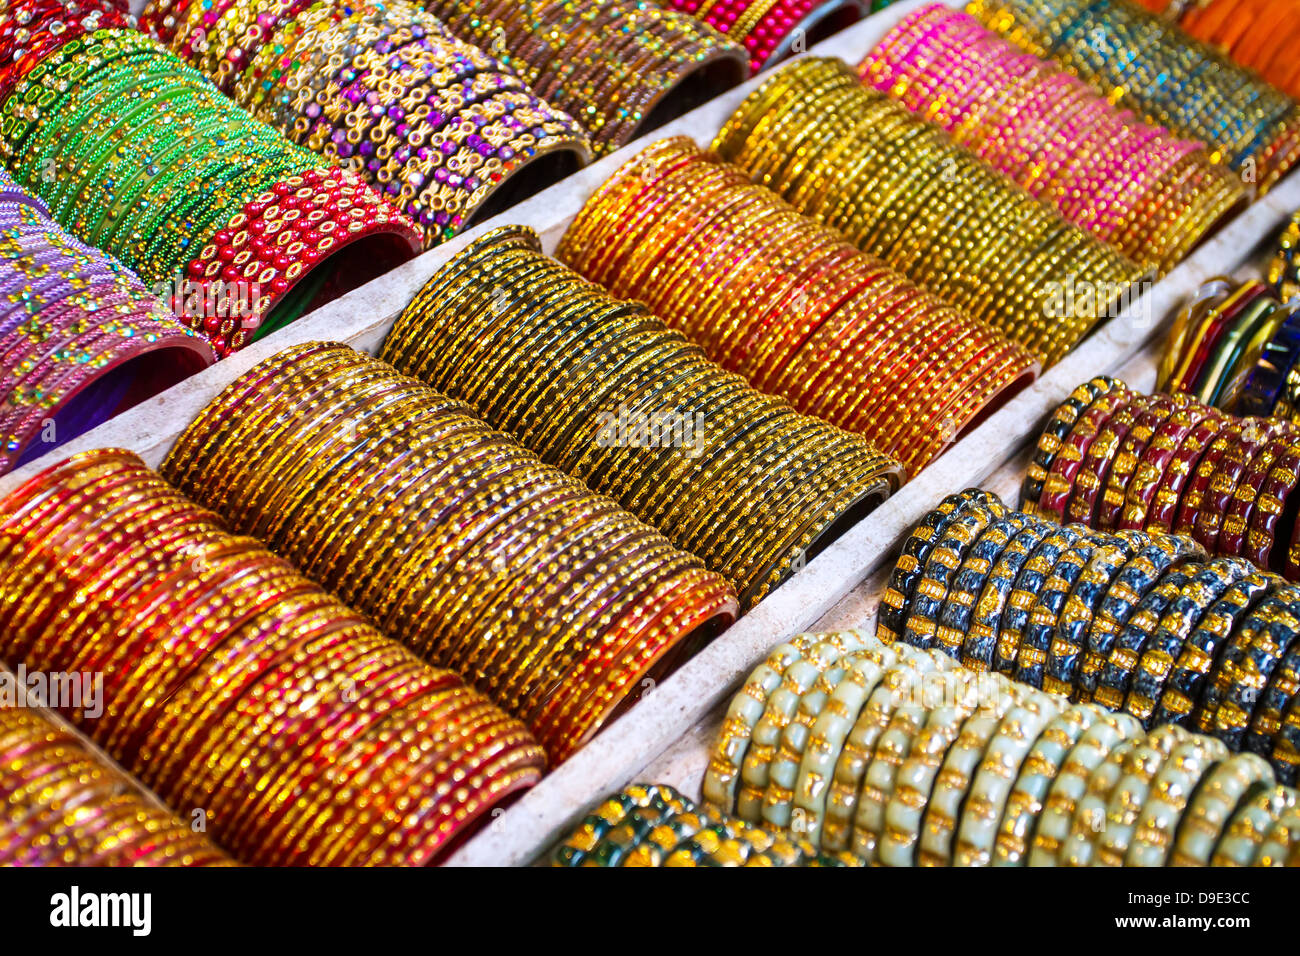 Colorful bangles - jewelery bracelets at the market in India Stock Photo